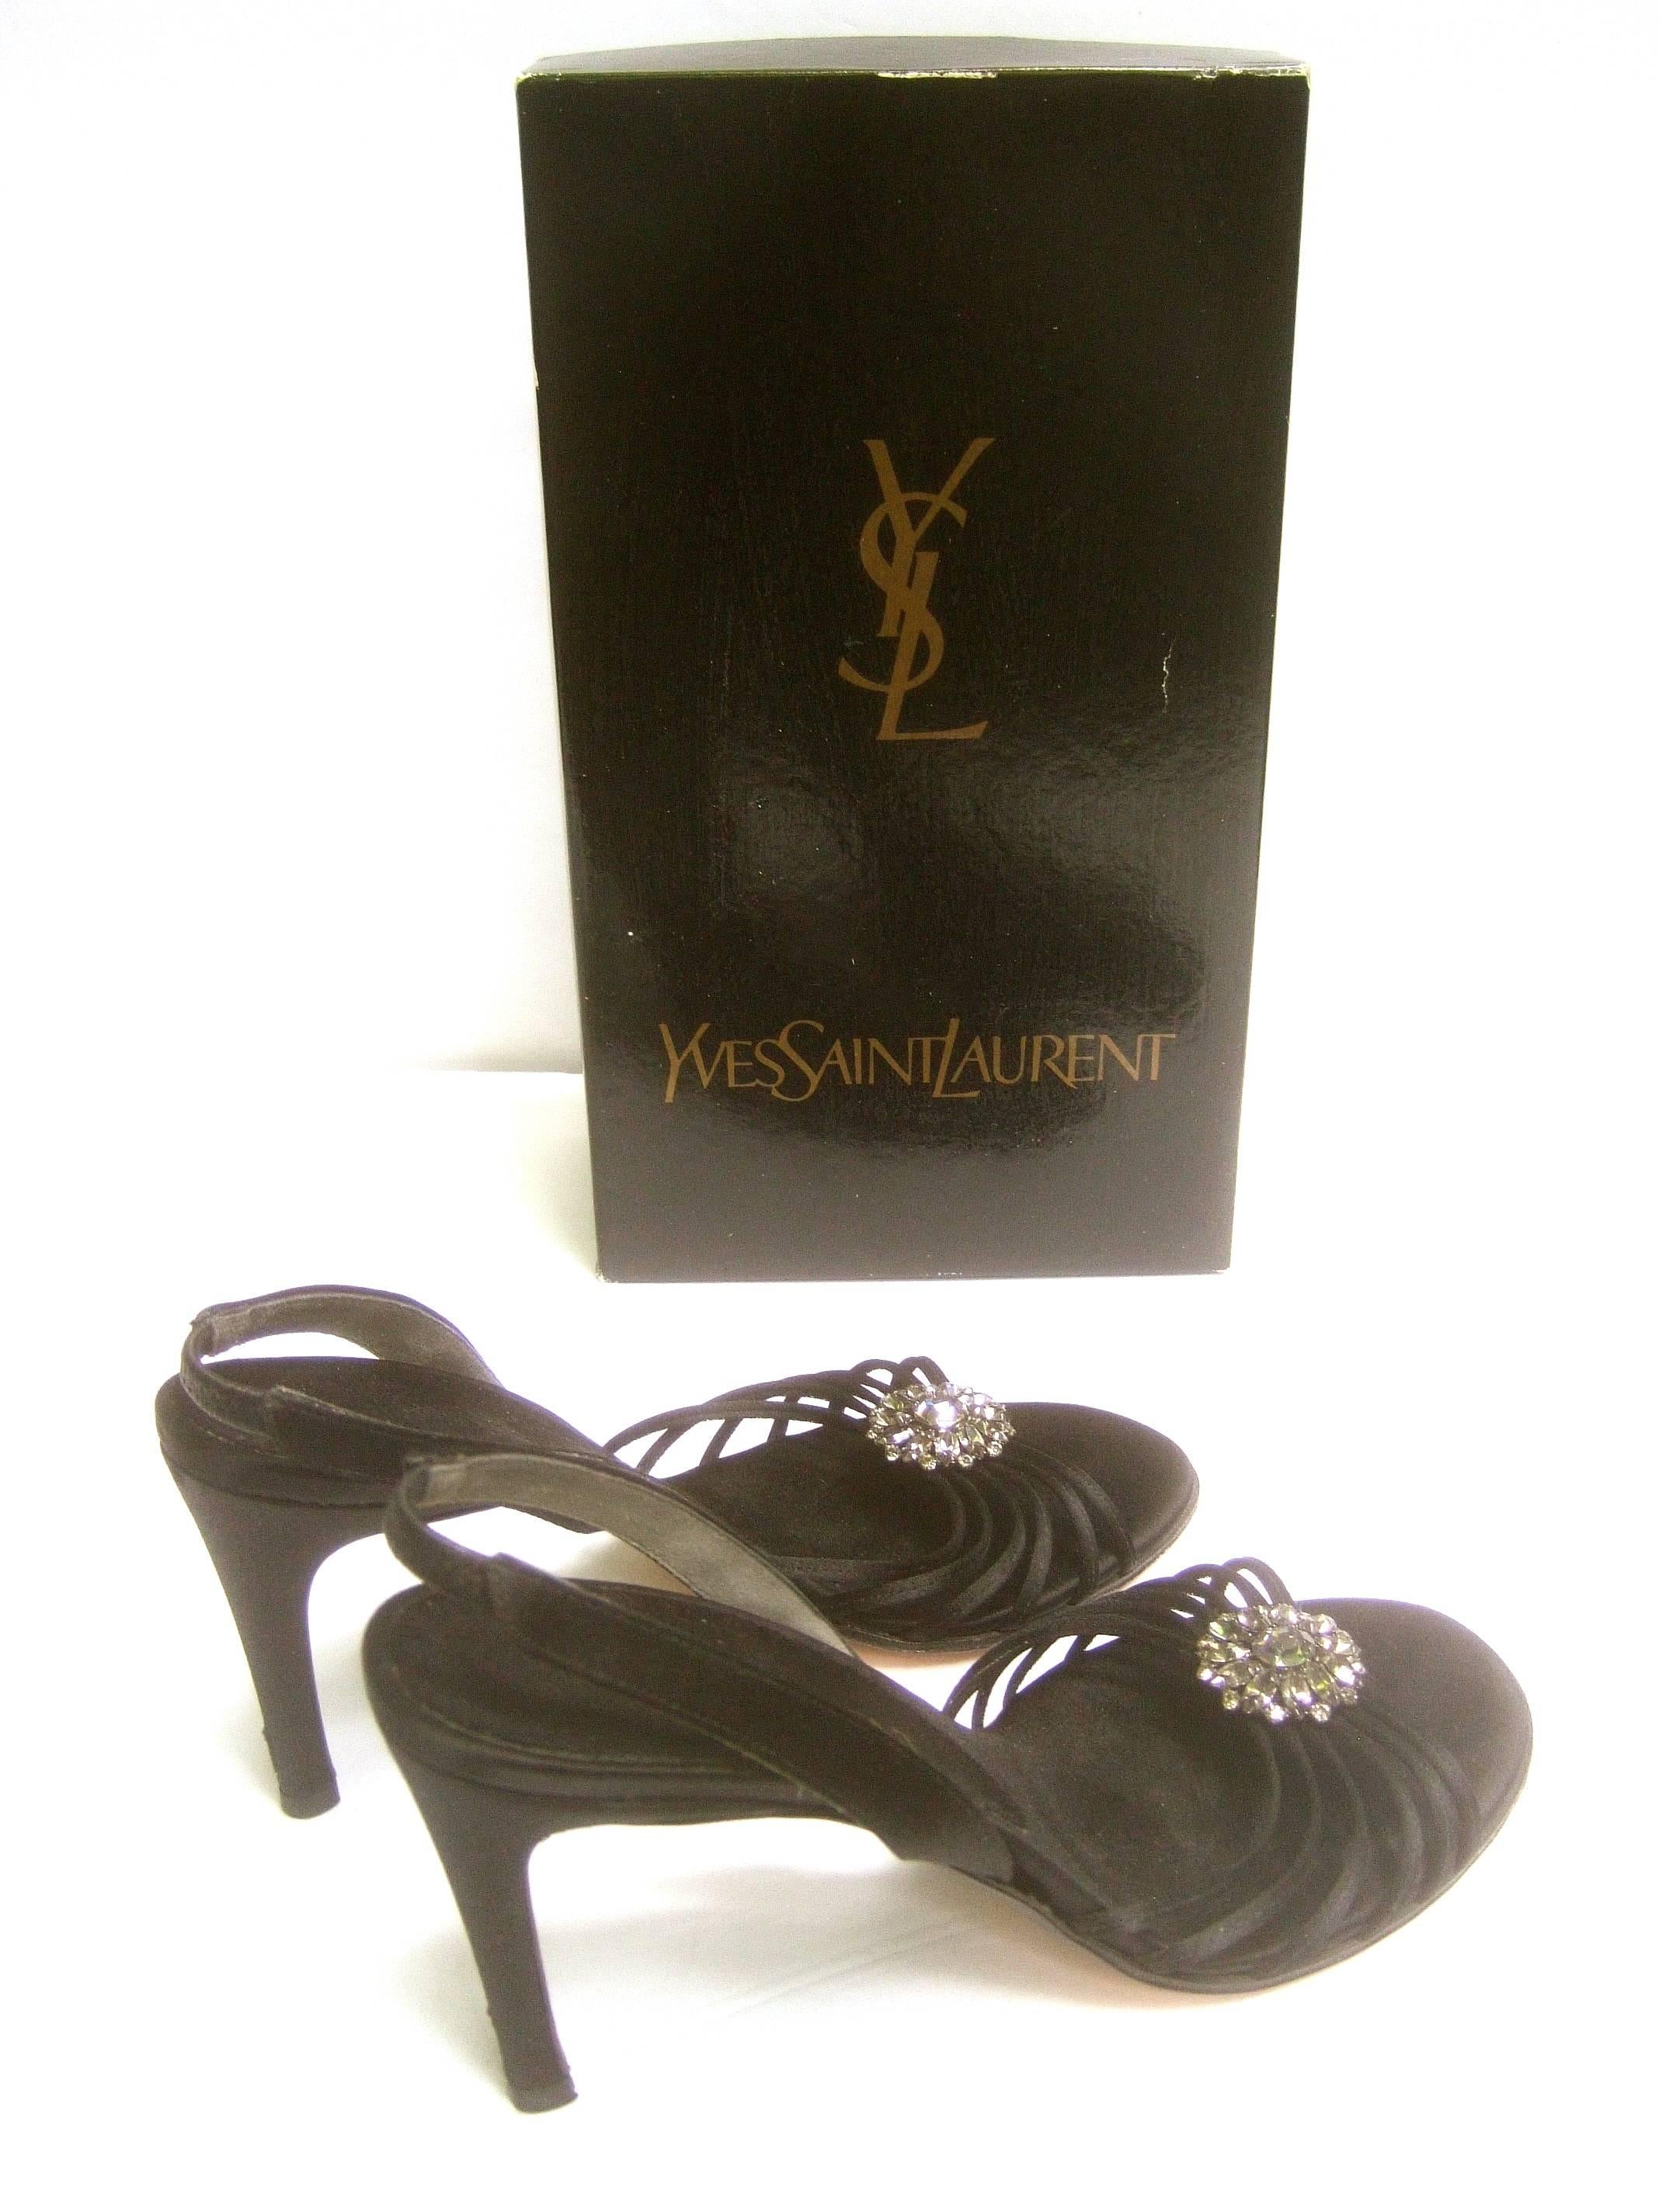 Women's Yves Saint Laurent Black Crystal Satin Pumps in YSL Box Size 7.5 M For Sale